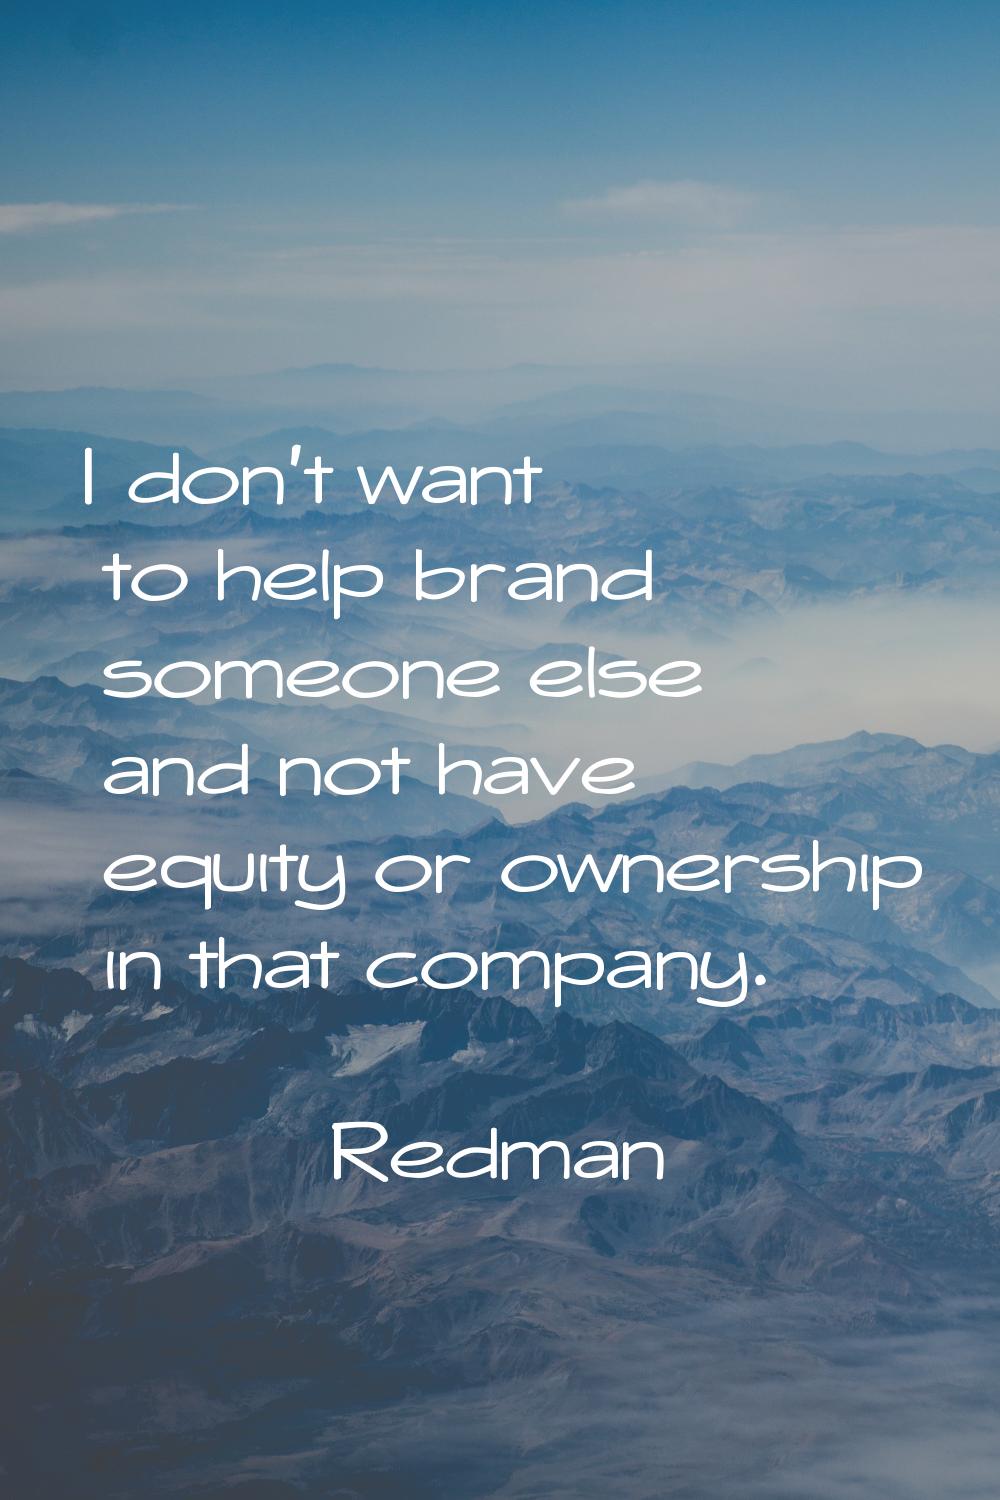 I don't want to help brand someone else and not have equity or ownership in that company.